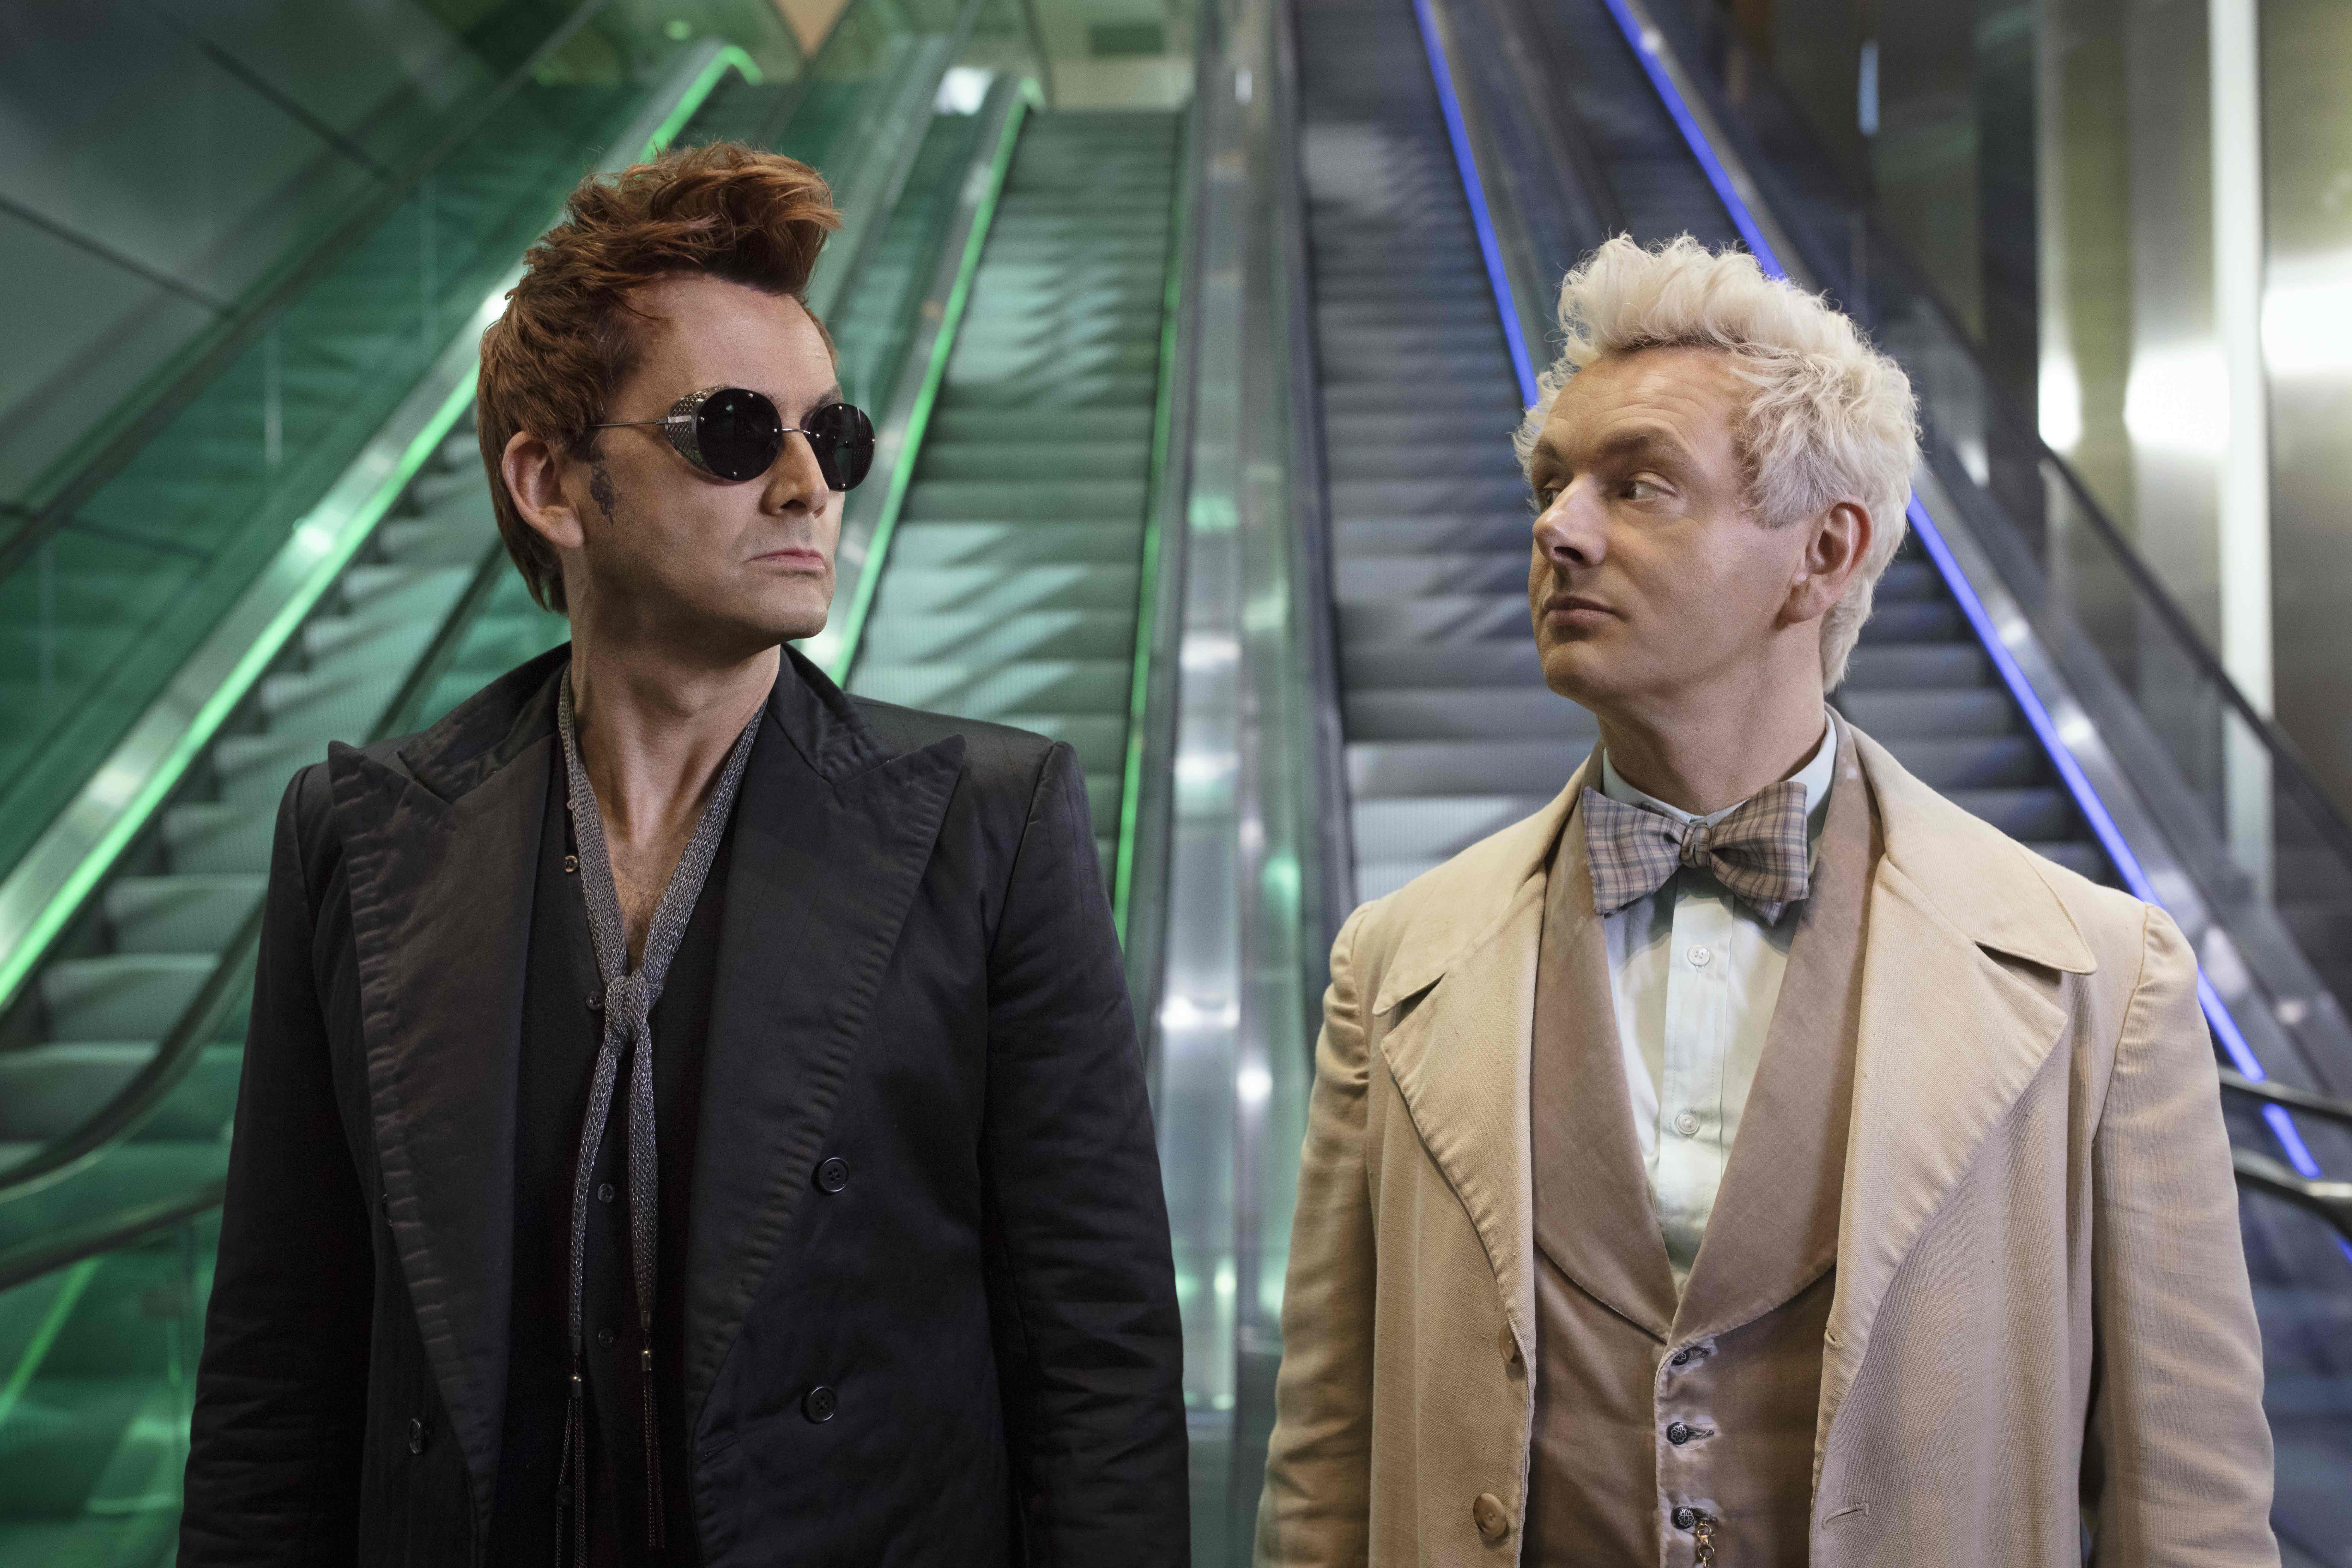 David Tennant, wearing sunglasses and black suit, and Michael Sheen, wearing a white suit, in 'Good Omens' 